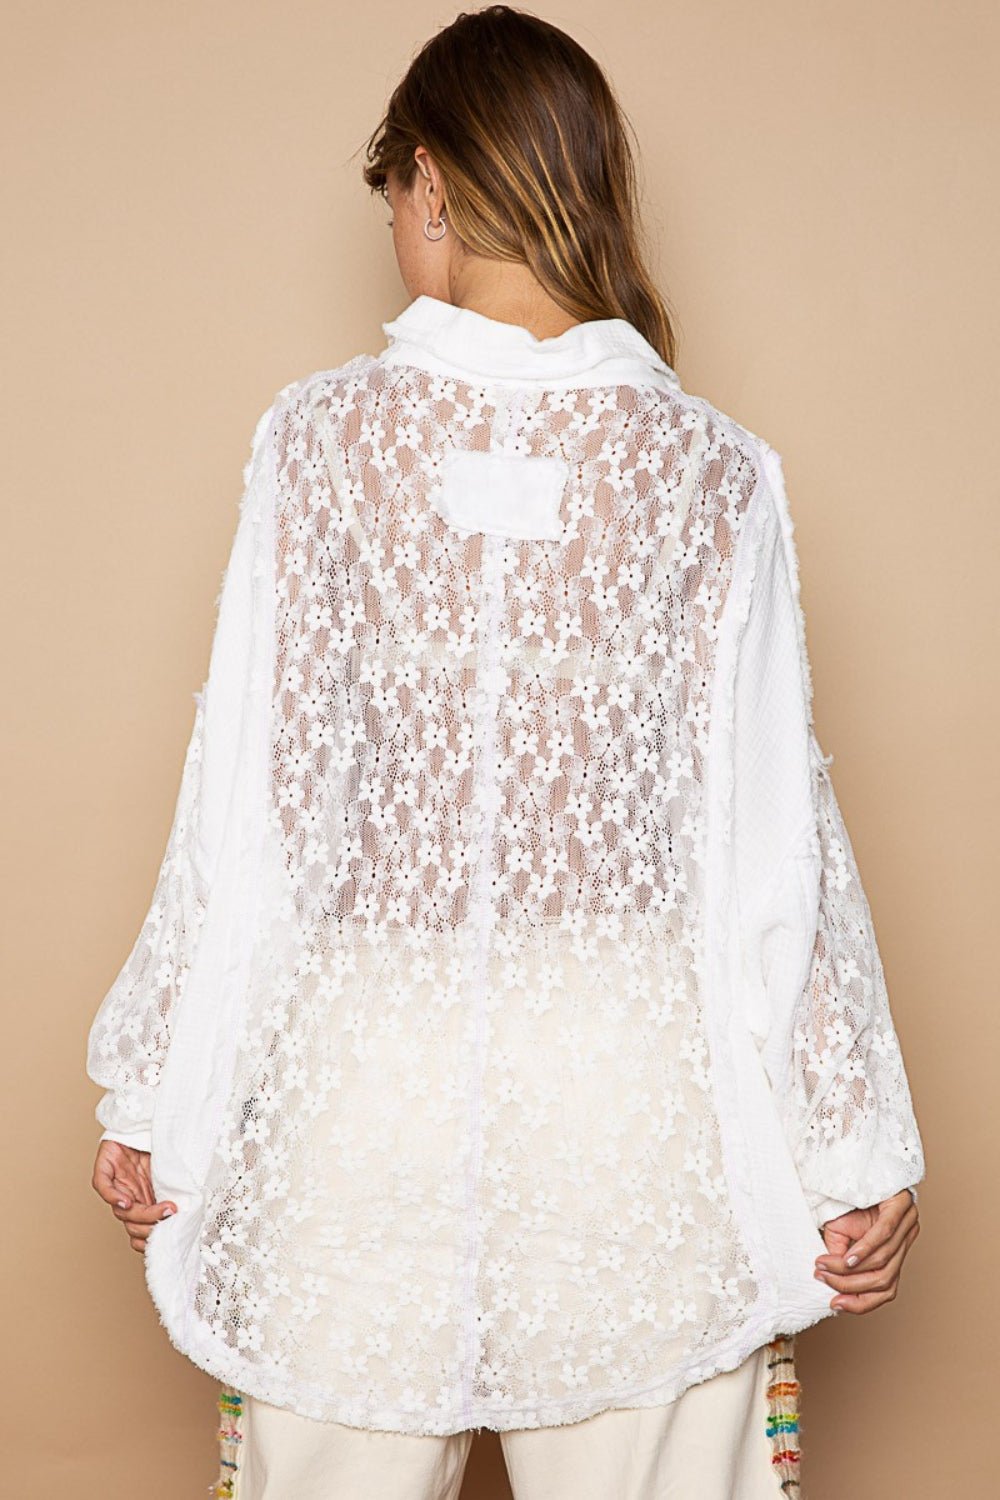 Oversized Lace Button-Down Shirt in Off-WhiteShirtPOL